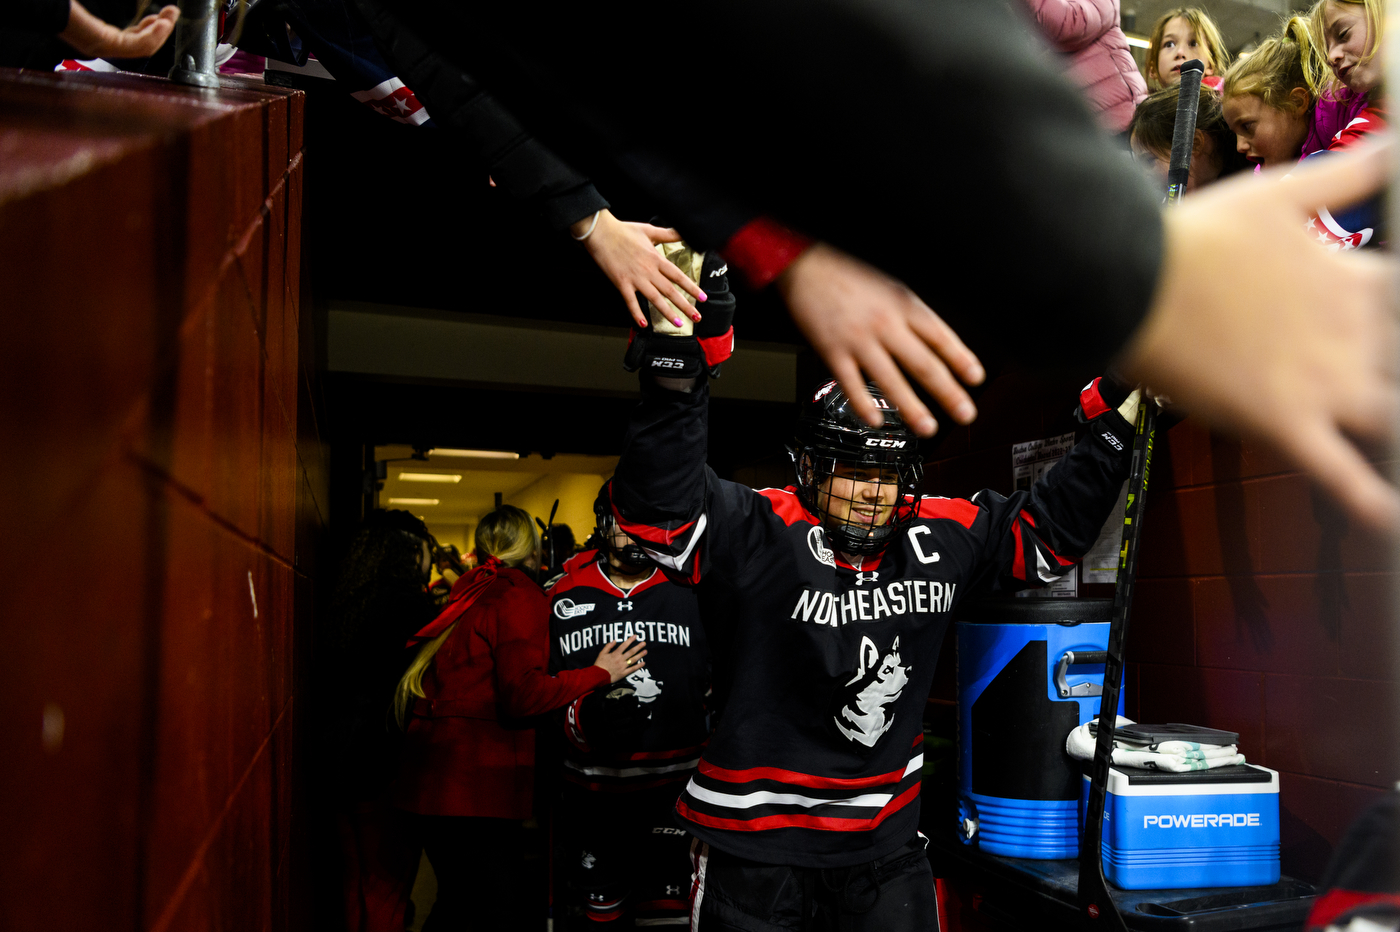 A hockey player in uniform and a helmet high fives fans leaning over the tunnel entrance as the player enters the arena